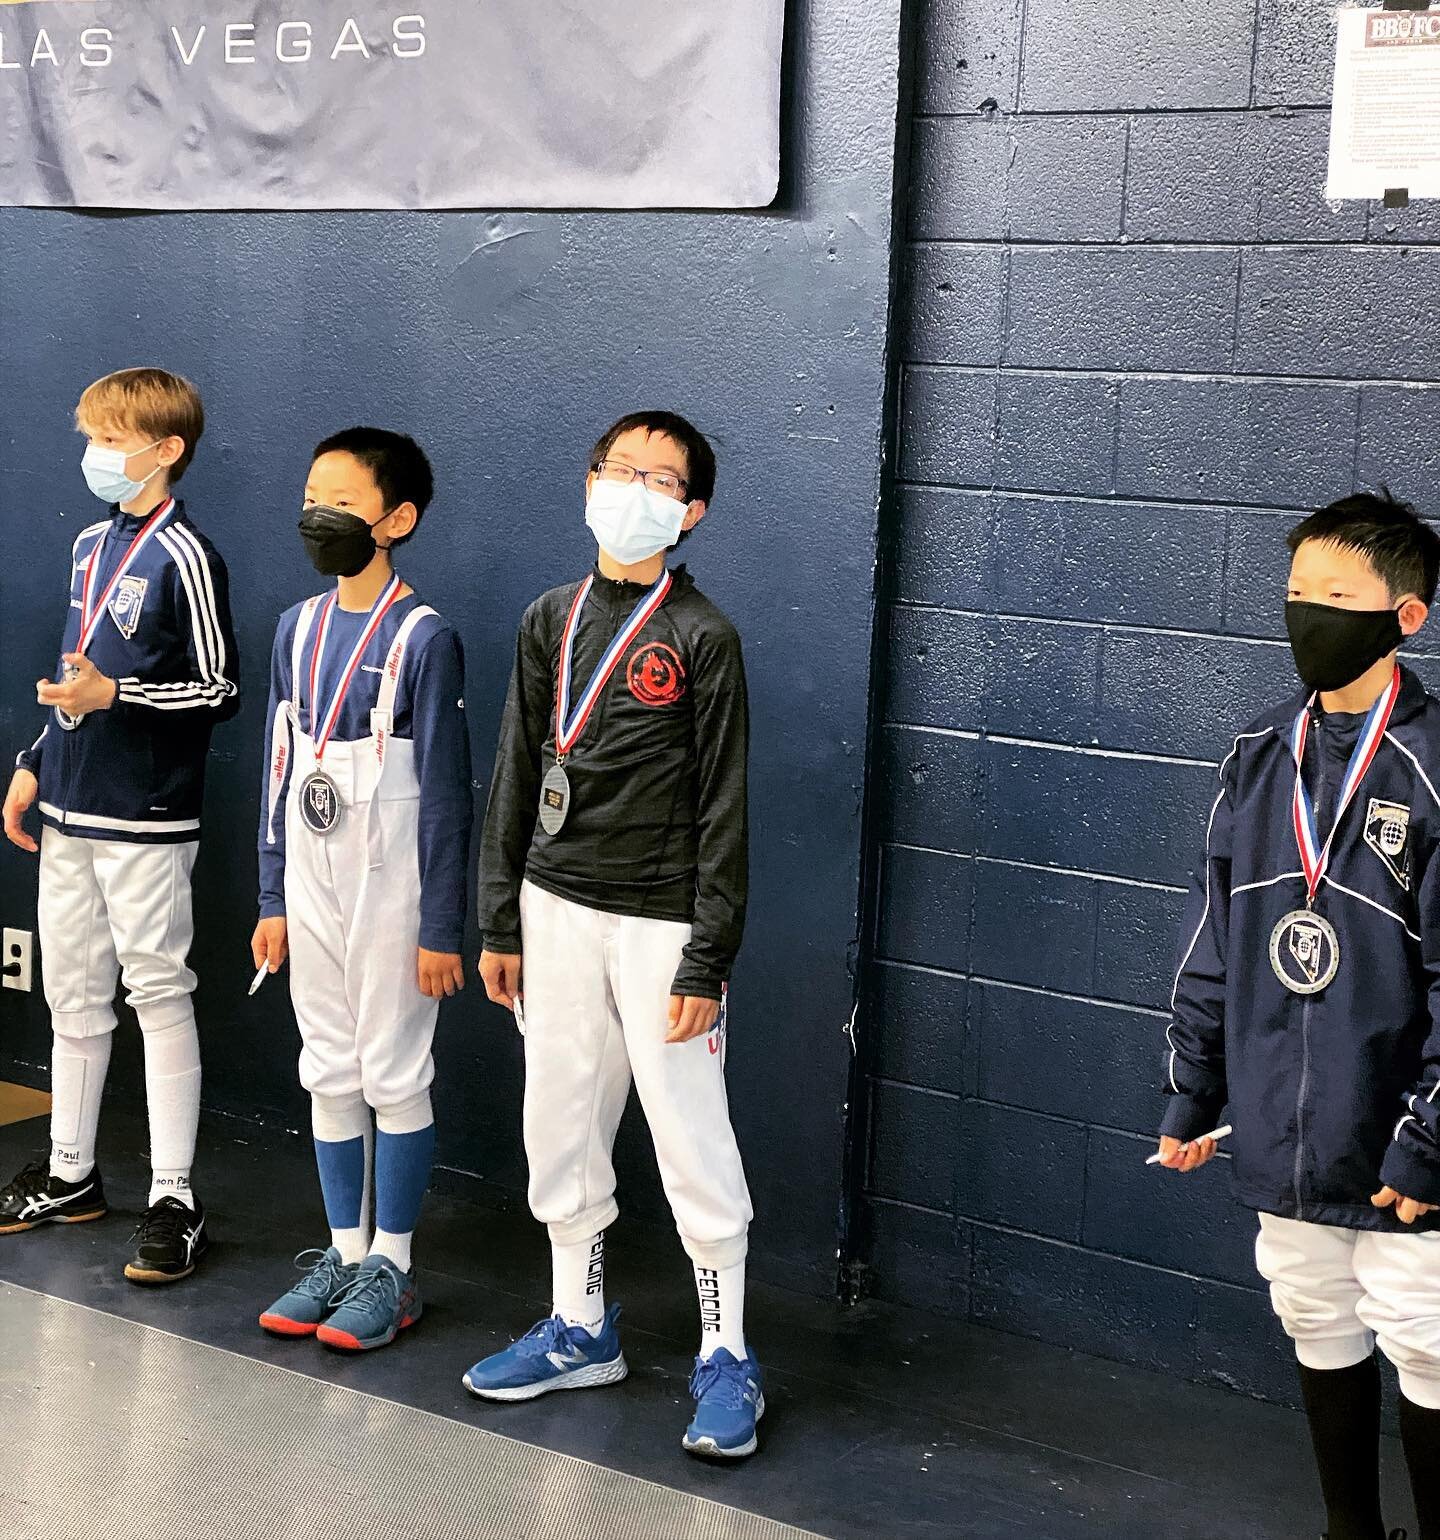 Congrats to @_damienlee_ for a stellar silver medal performance at the 2nd Annual Vegas RYC. We are tremendously proud of his growth and what he brought to the strip today! #fencing #epee #vegas #youthsports #athlete